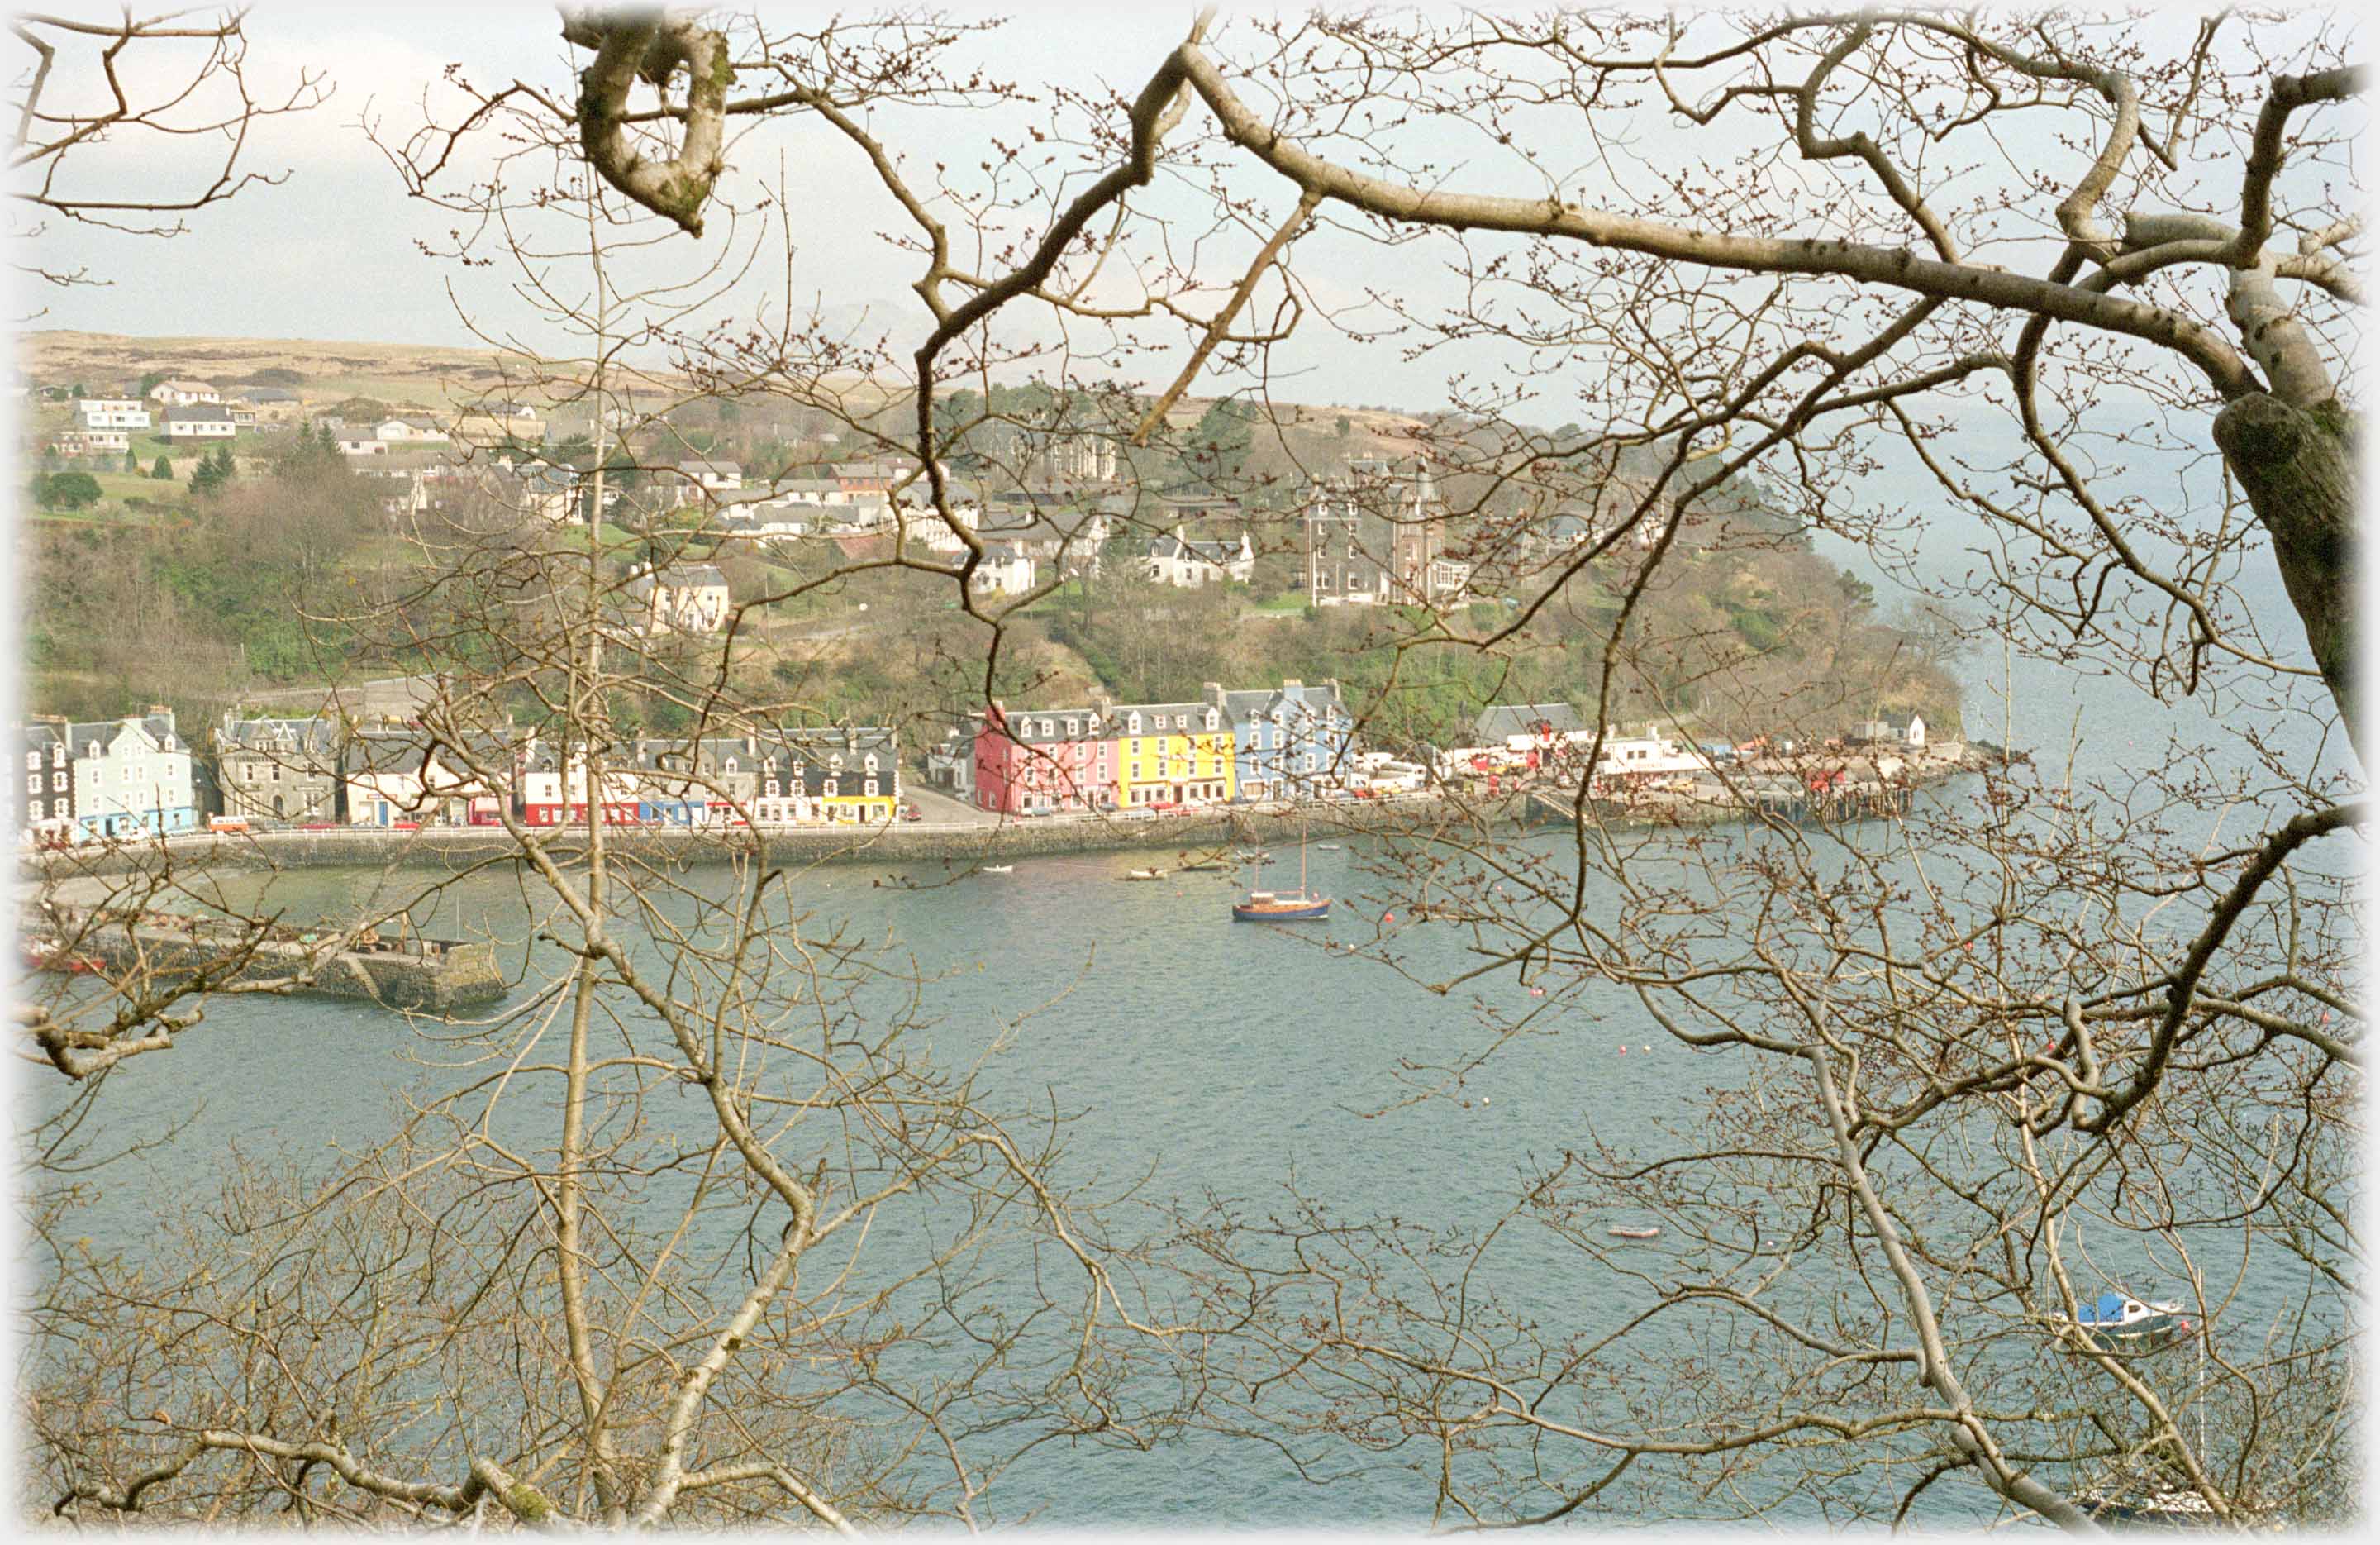 Looking across bay through branches at waterfront with houses up hill behind.